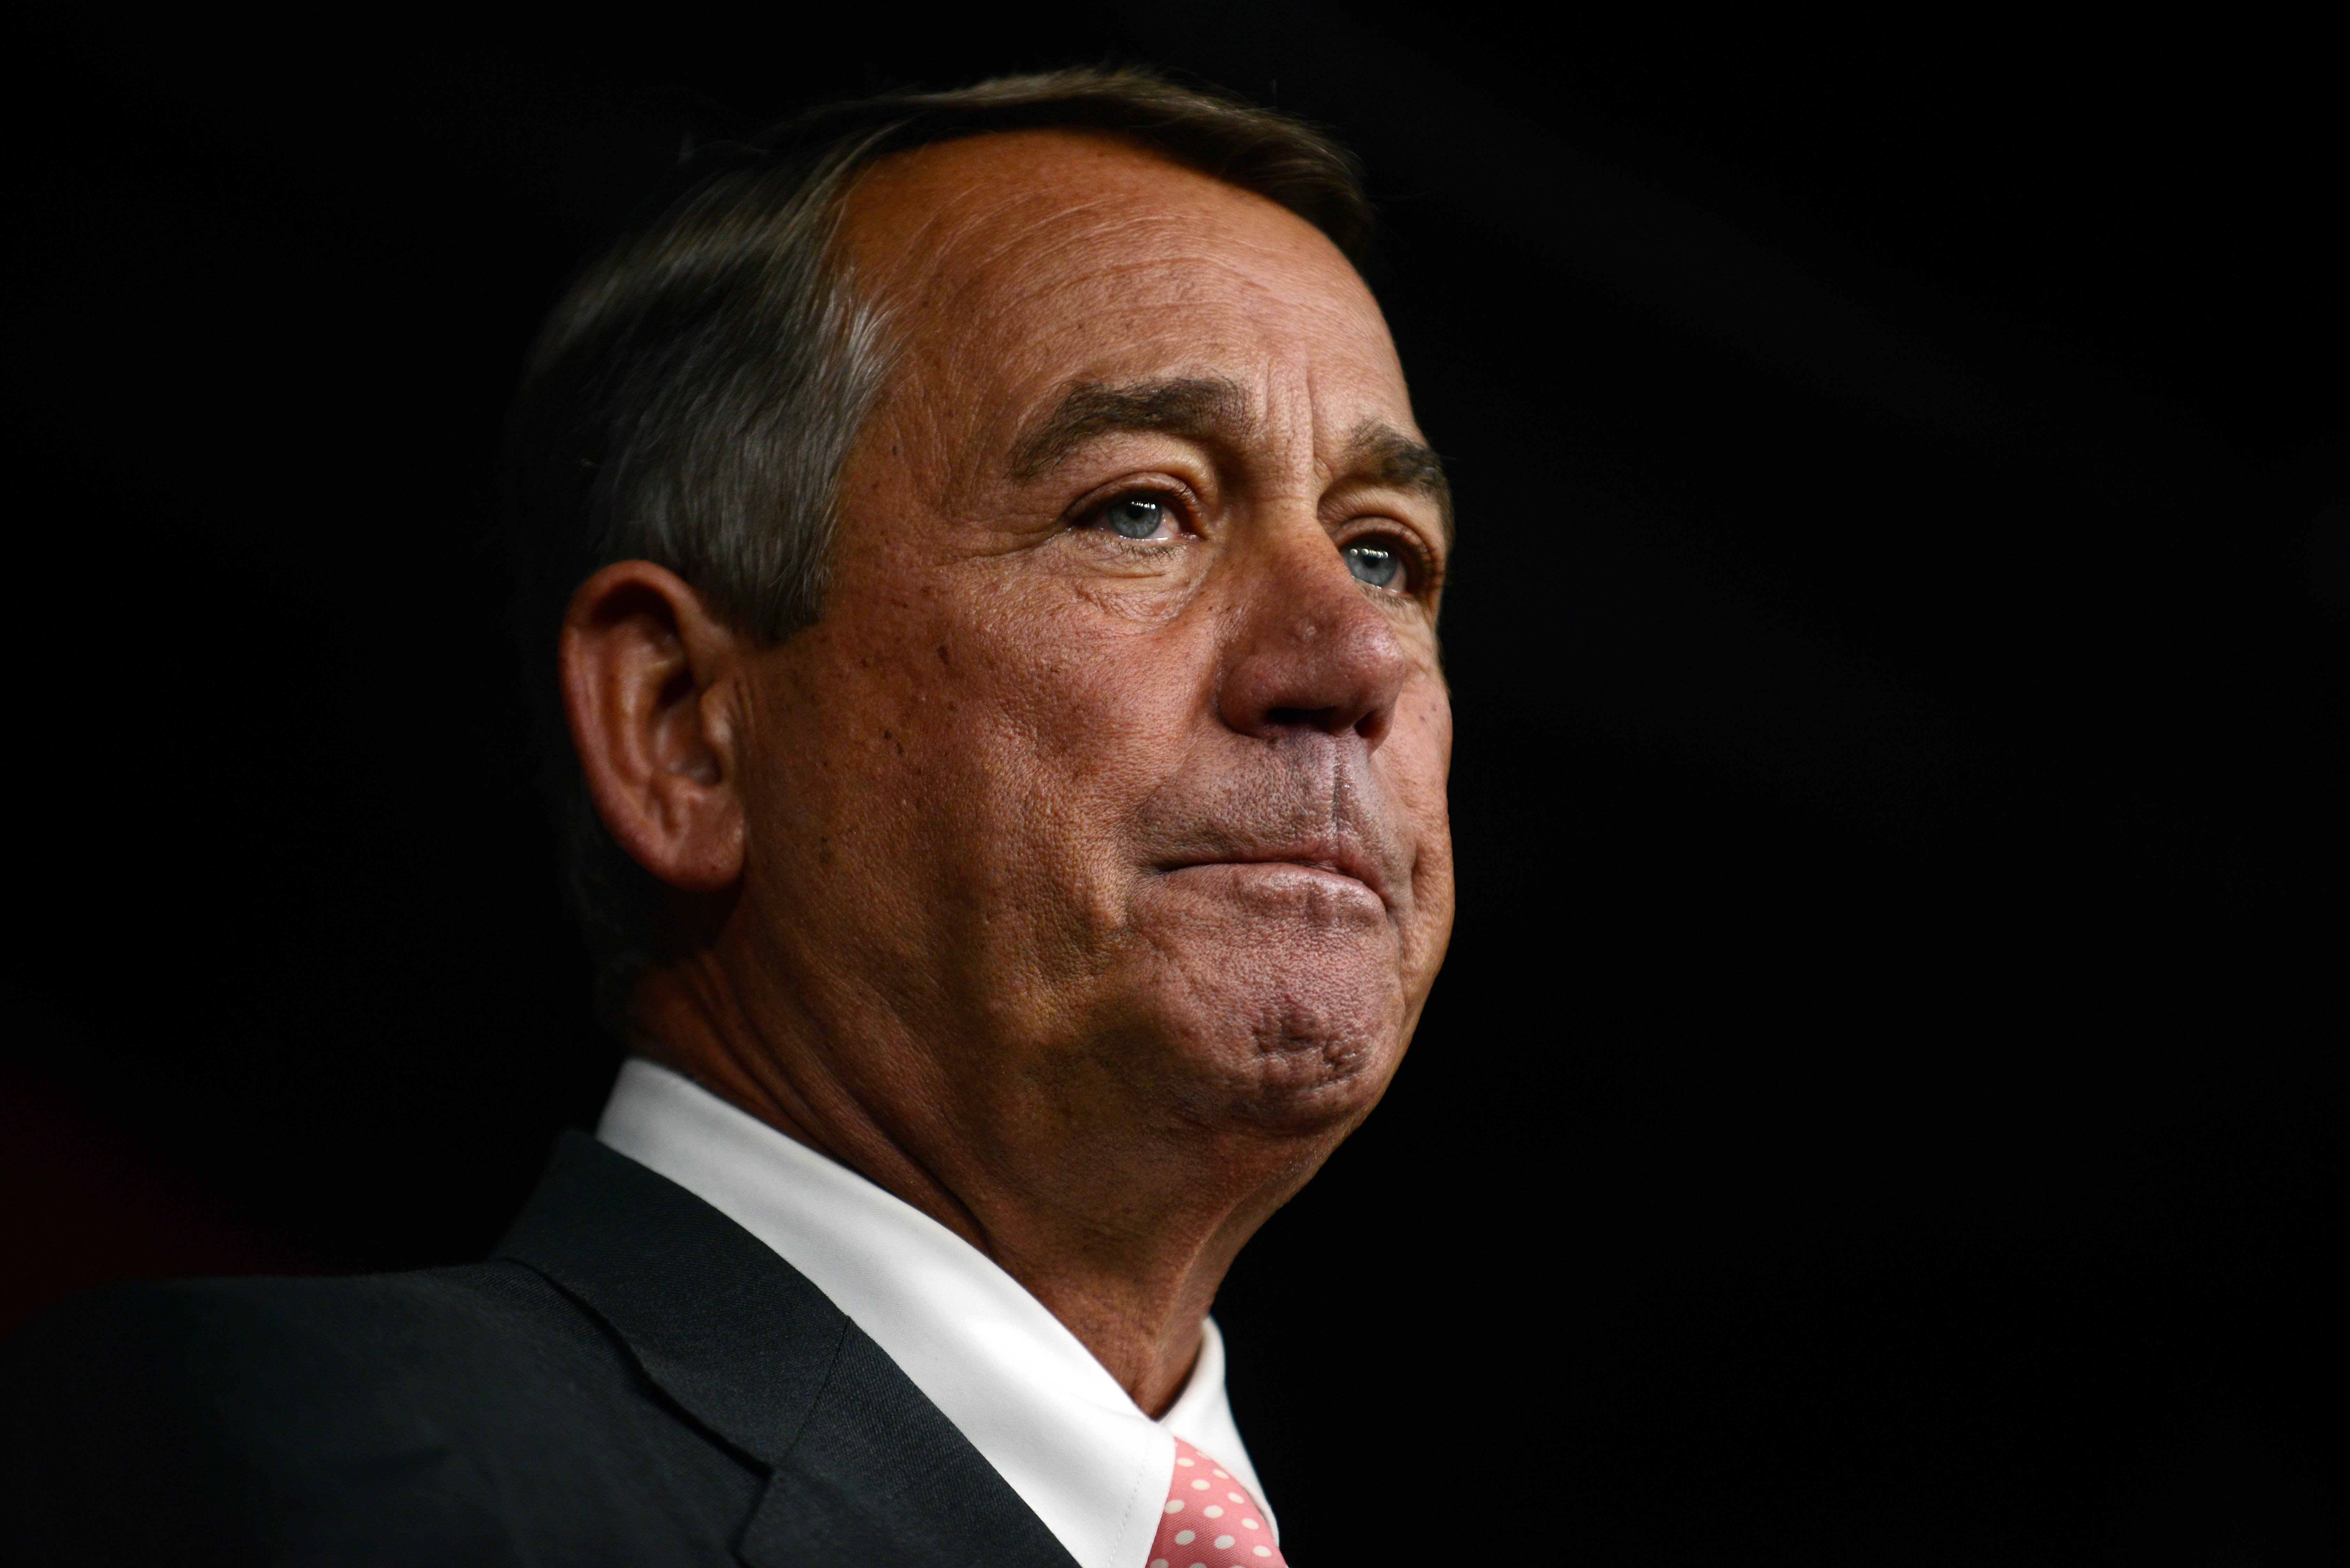 After 25 years in Congress and five years as Speaker, Boehner said he decided to step down after contemplation and prayer. Photo: AFP